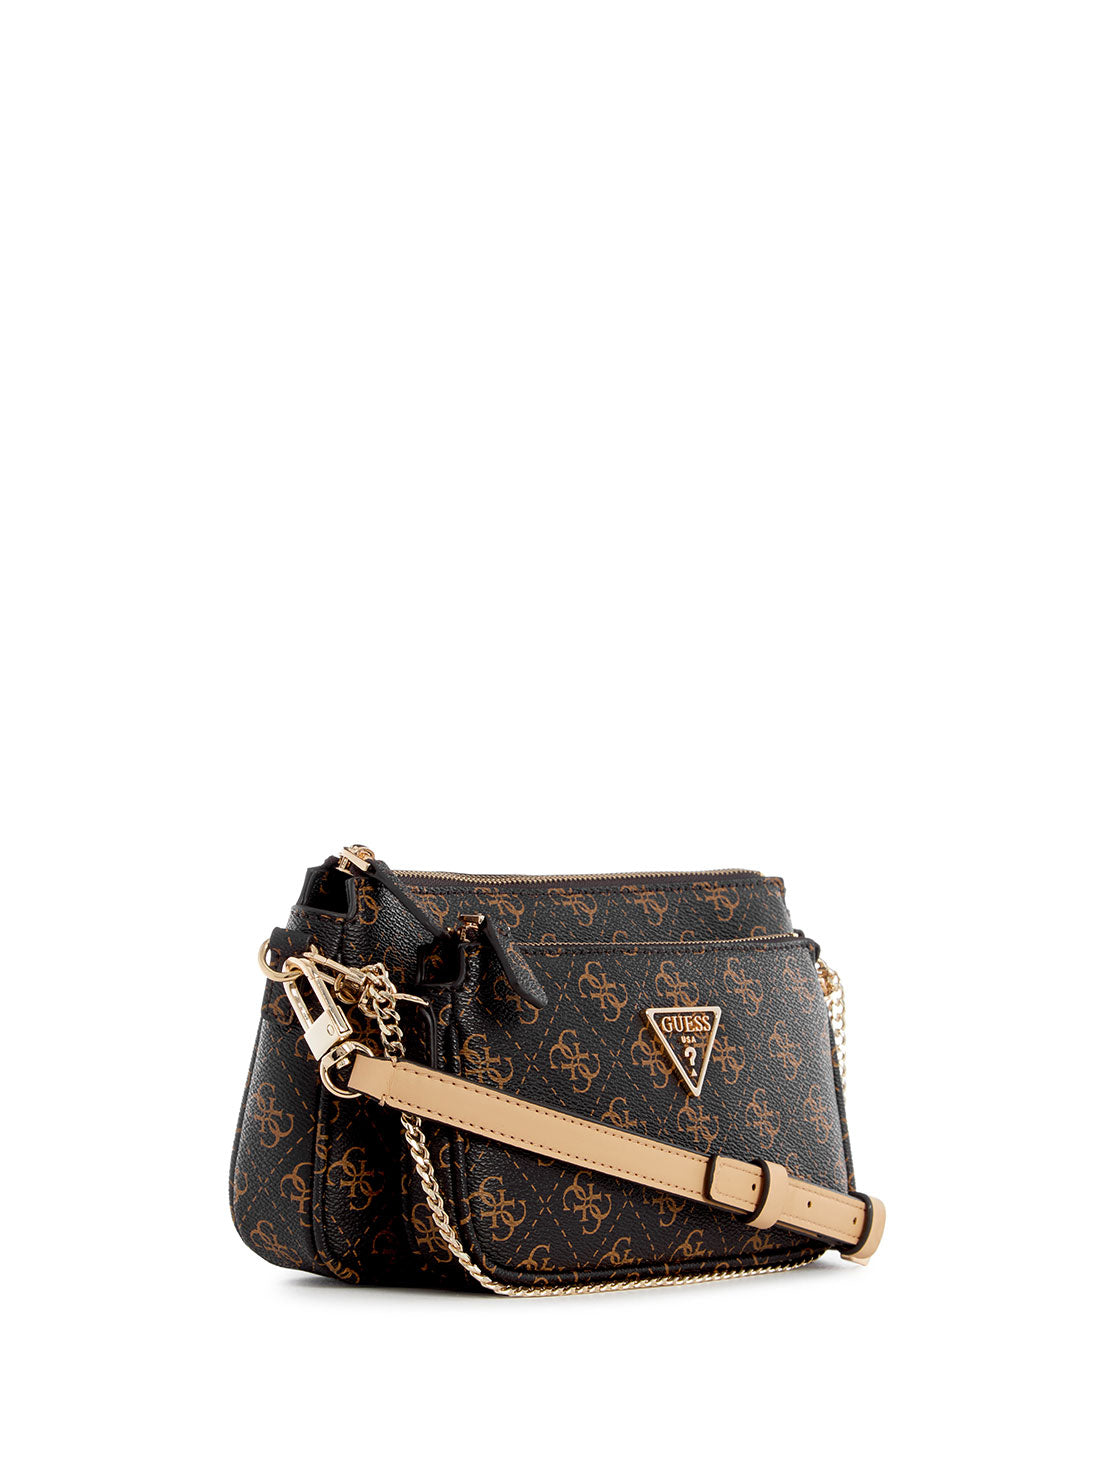 GUESS Women's Brown Logo Noelle Crossbody Pouch Bag QB787971 Angle View